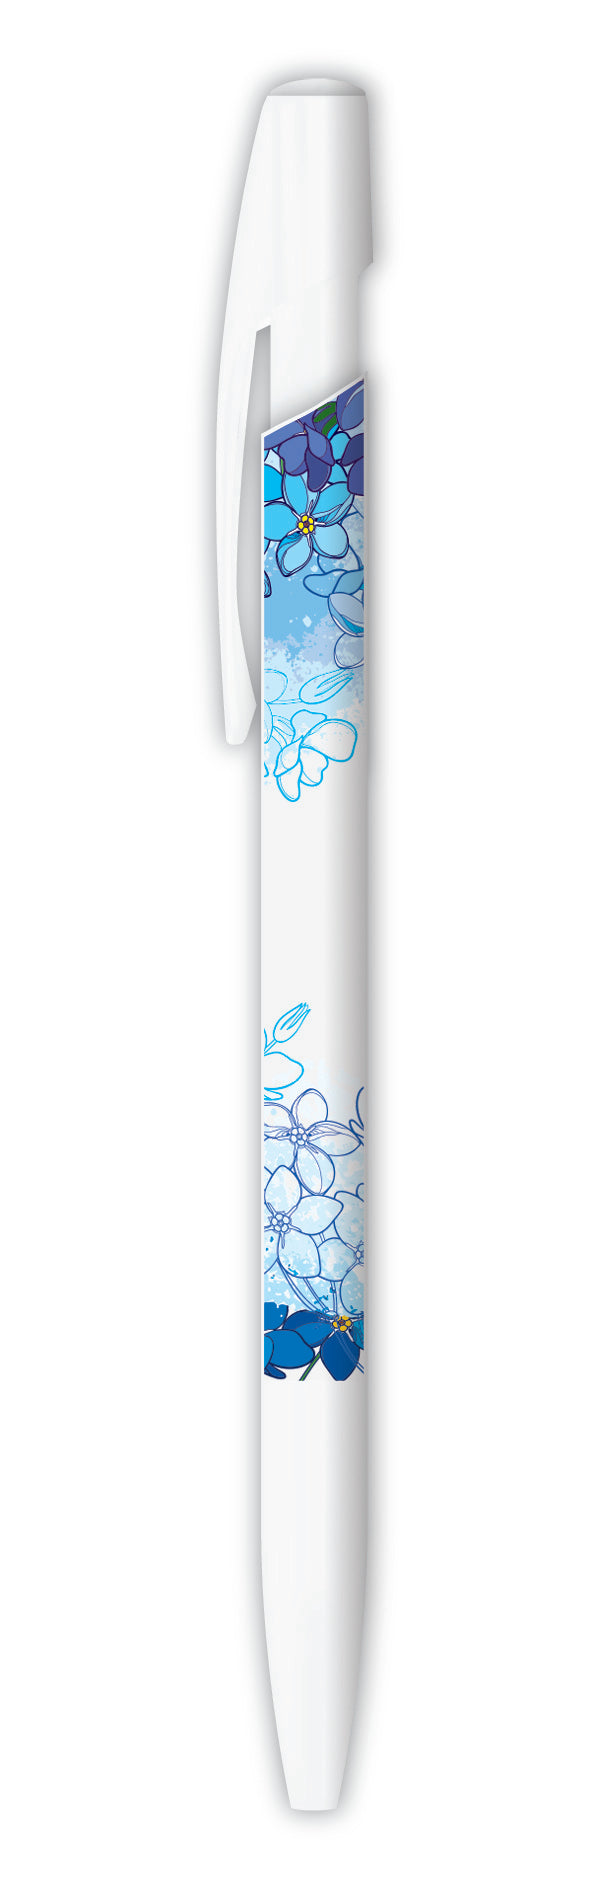 Forget-me-not eco pen